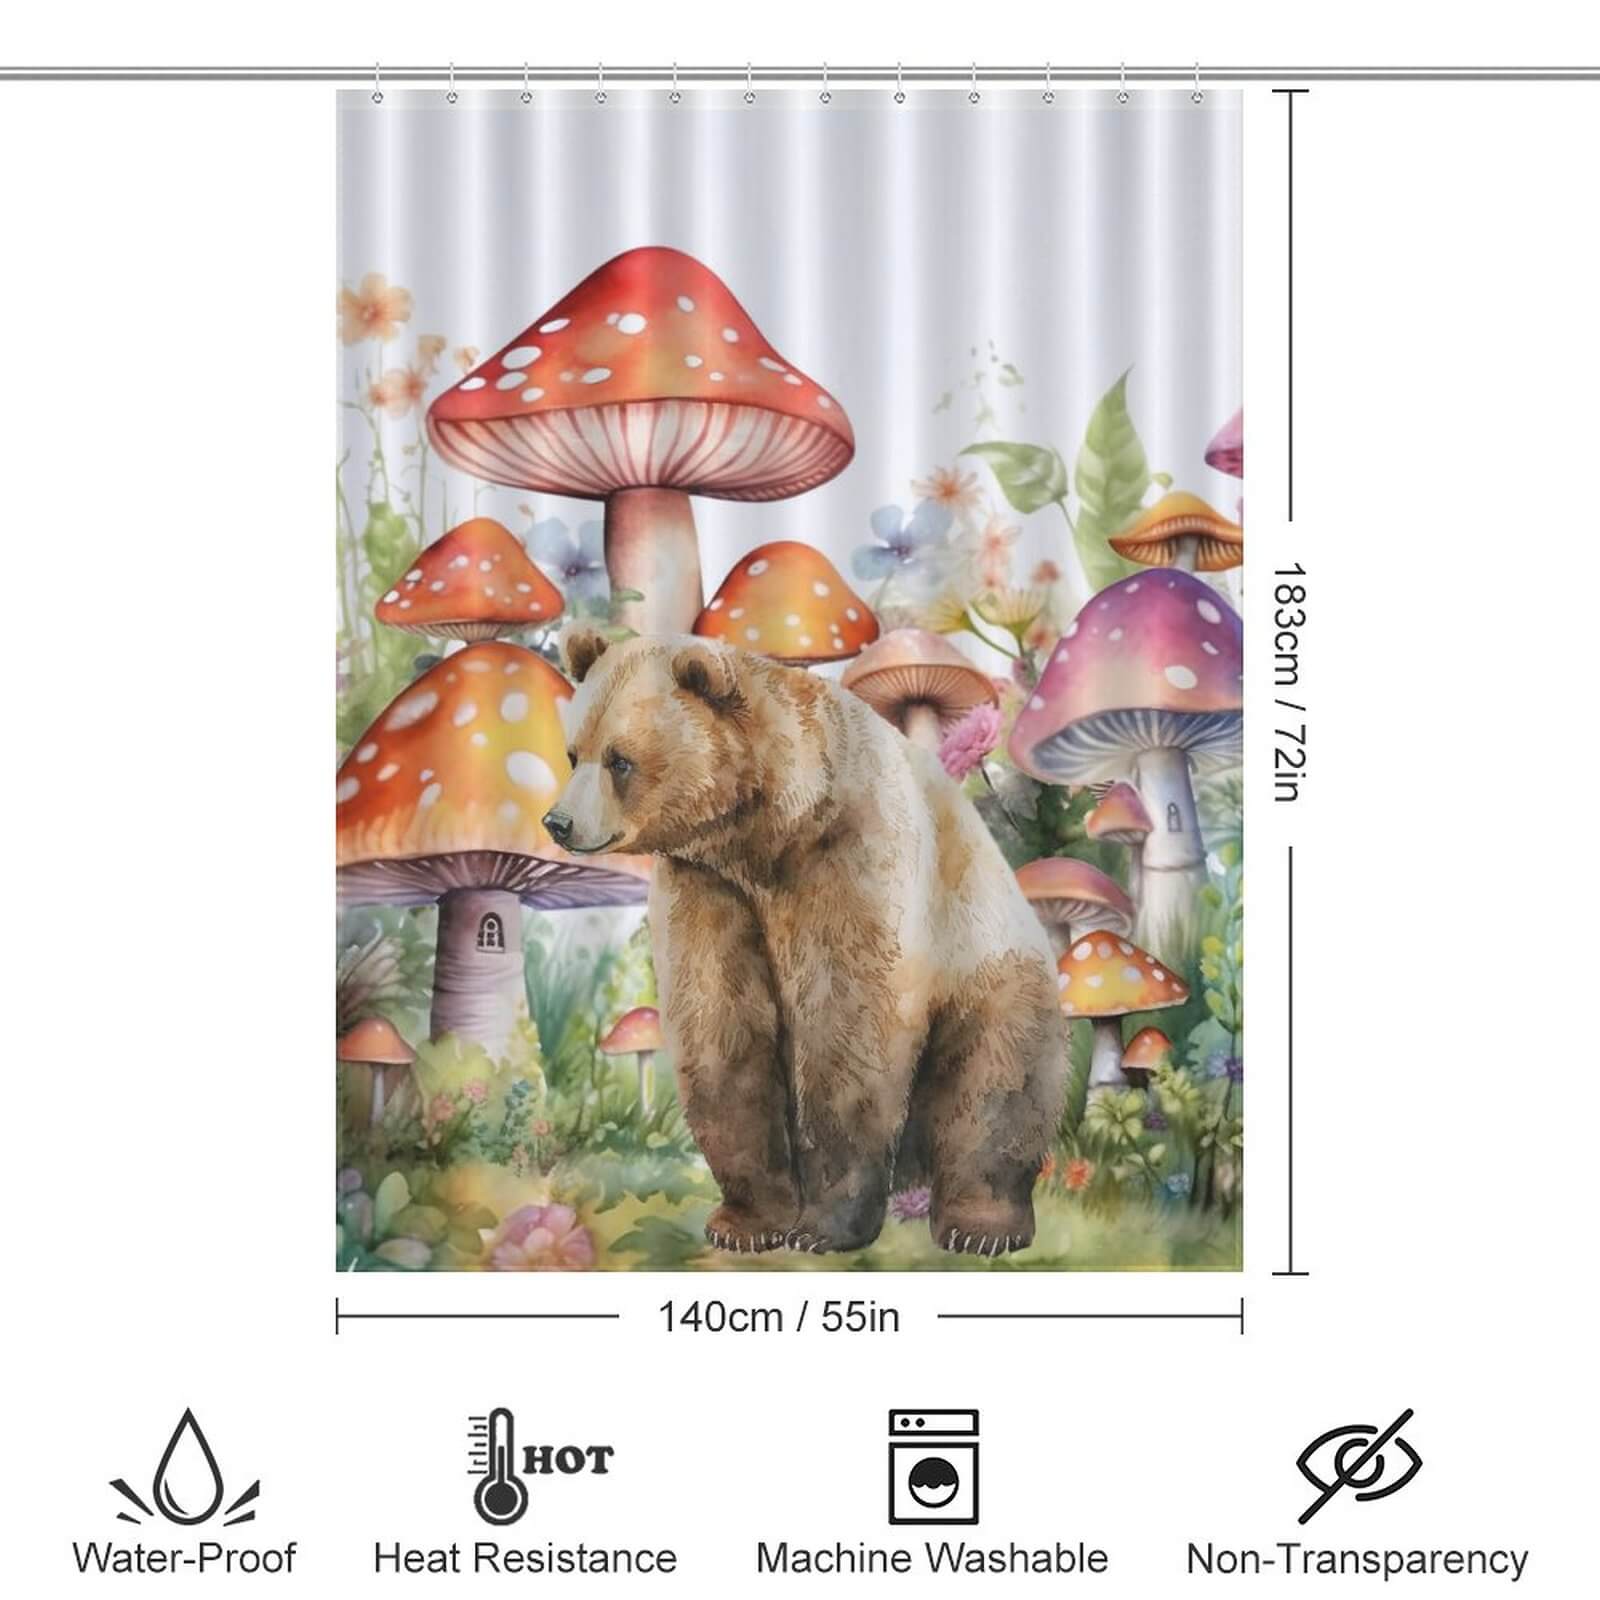 This Watercolor Mushroom Bear Shower Curtain-Cottoncat by Cotton Cat features a playful brown bear and charming mushrooms, making it the perfect addition to your bathroom decor.